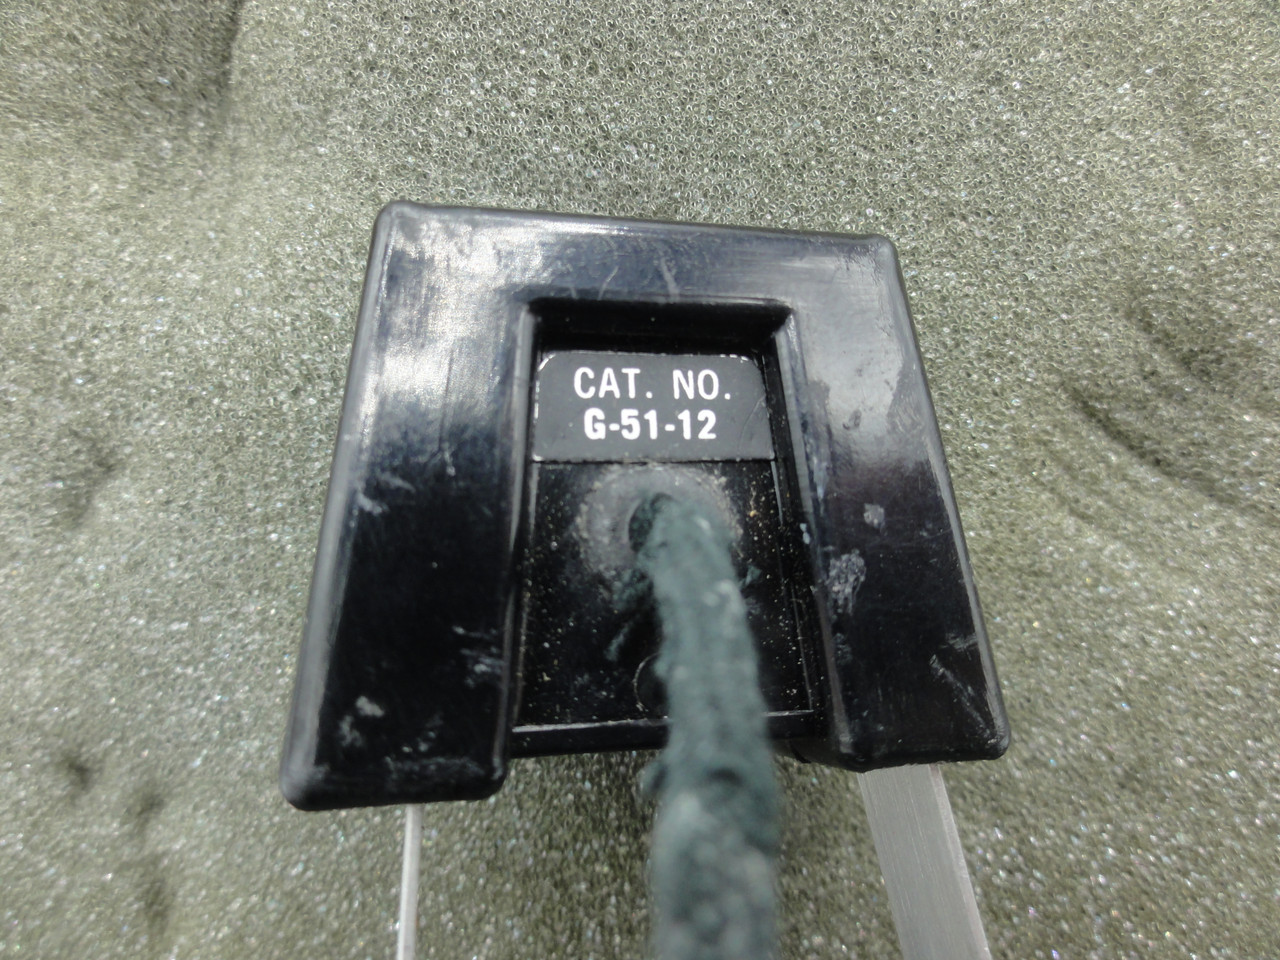 Instron Cat. No. G-51-12 Strain Gage Extensometer